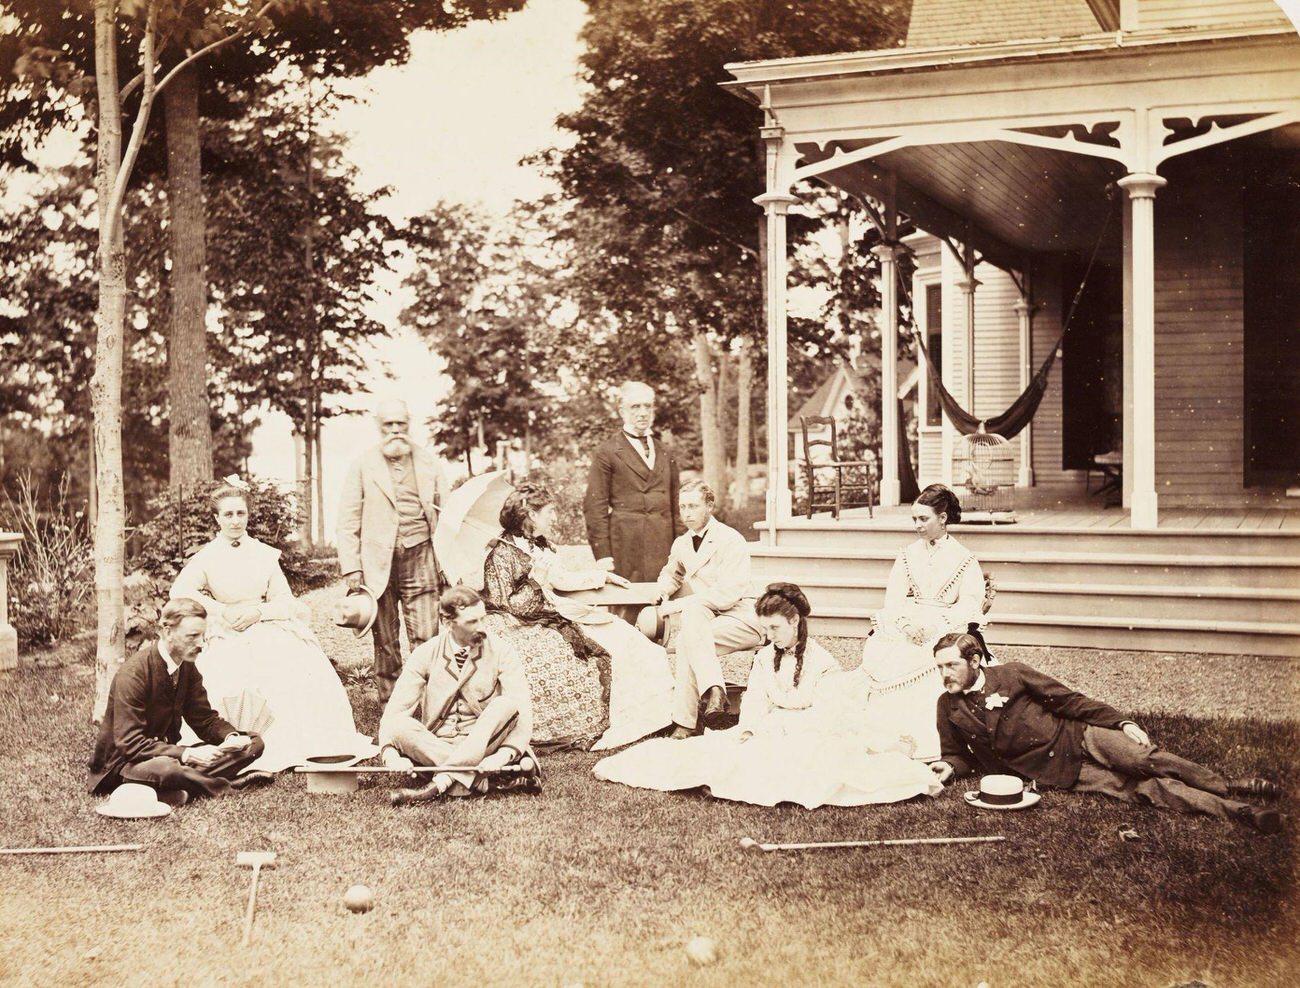 Sir Hugh Allen and family at their villa in Belmere, Canada, 1860.